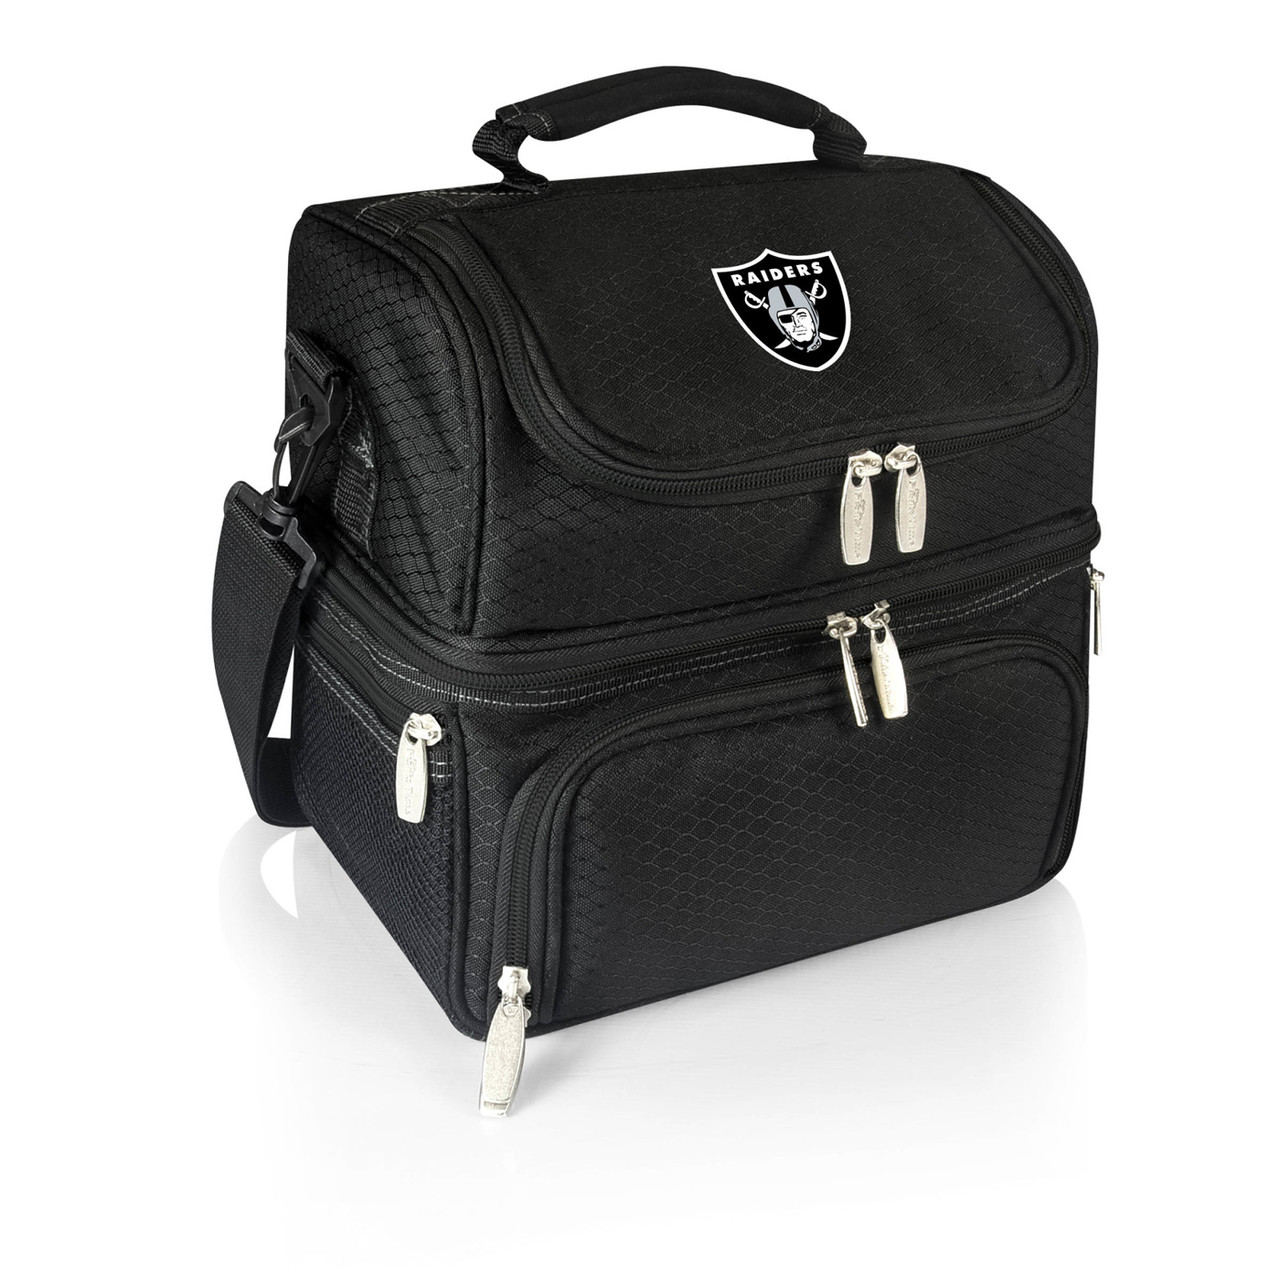 OAKLAND RAIDERS TIN LUNCH BOX WITH THERMOS BRAND NEW